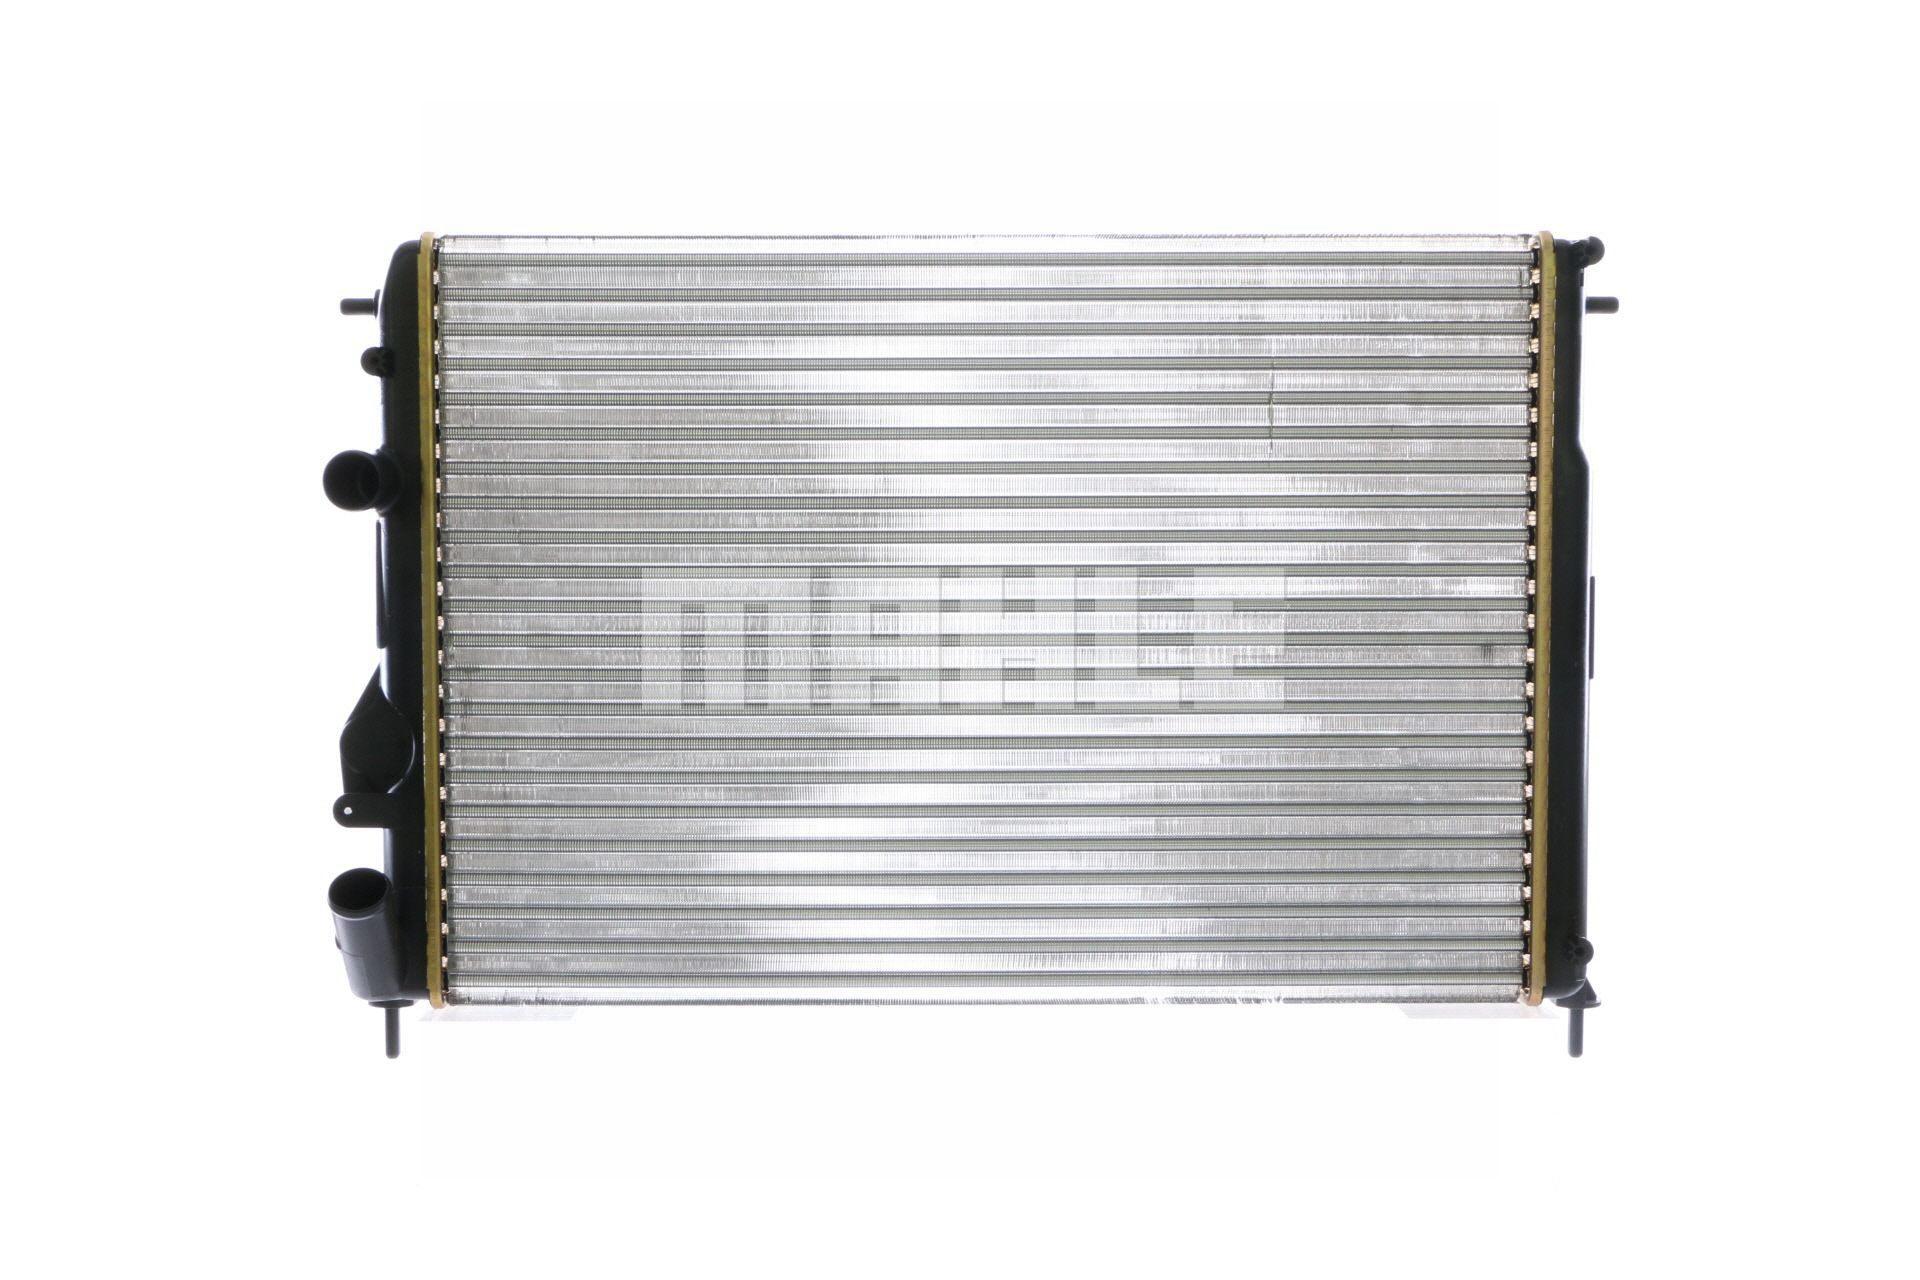 376755364 MAHLE ORIGINAL for vehicles with air conditioning, 585 x 415 x 23 mm, Manual Transmission, Mechanically jointed cooling fins Radiator CR 1146 000S buy